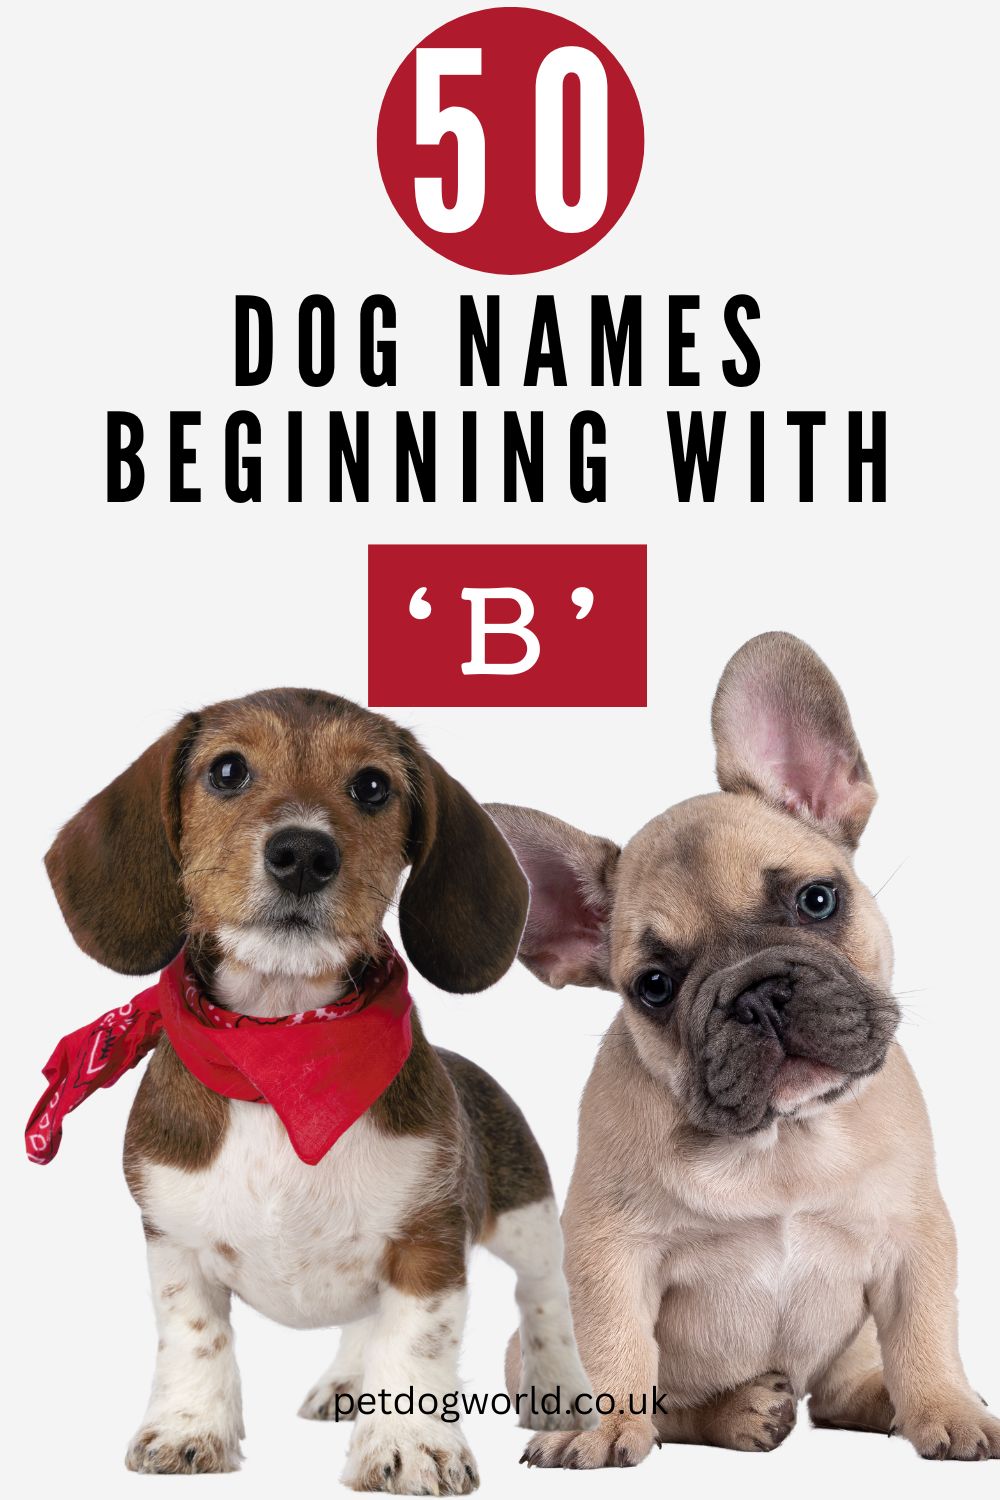 50 Dog Names Beginning with B